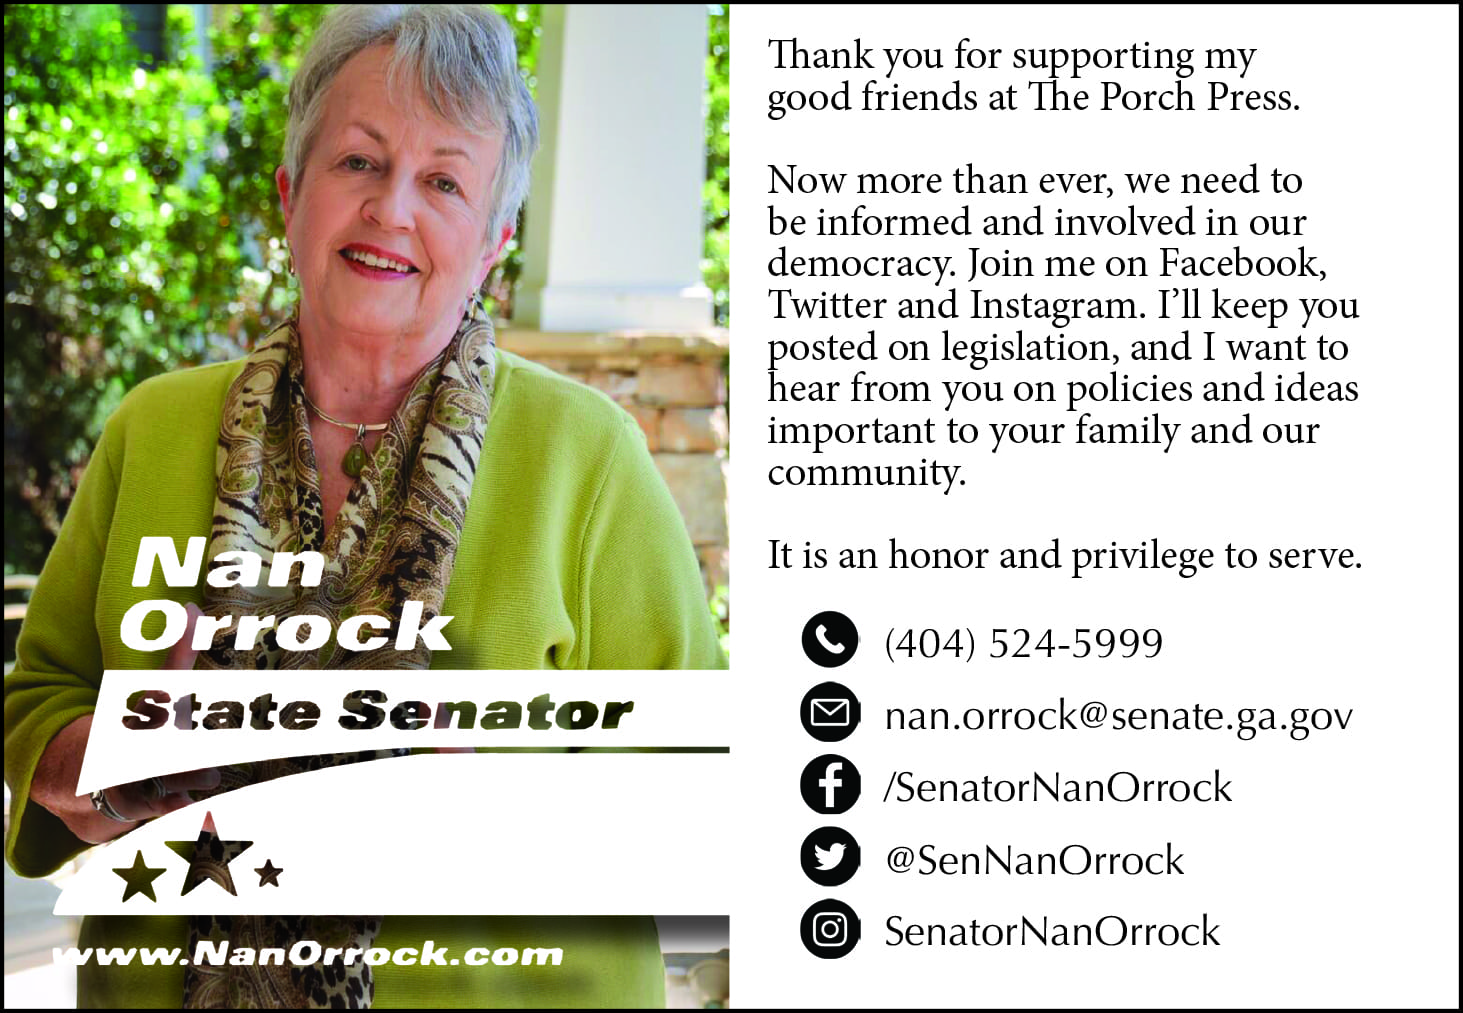 Ad: Nan Orrock, State Senator. Now more than ever, we need to be informed and involved in our democracy. Join me on Facebook, Twitter and Instagram. I'll keep you posted on legislation, and I want to hear from you on policies and ideas important to your family and our community. It is an honor and privilege to serve. Phone:(404) 524-5999, email: nan.orrock@senate.ga.gov, Facebook: SenatorNanOrrock,, Twitter: @SenNanOrrock, Instagram: SenatorNanOrrock